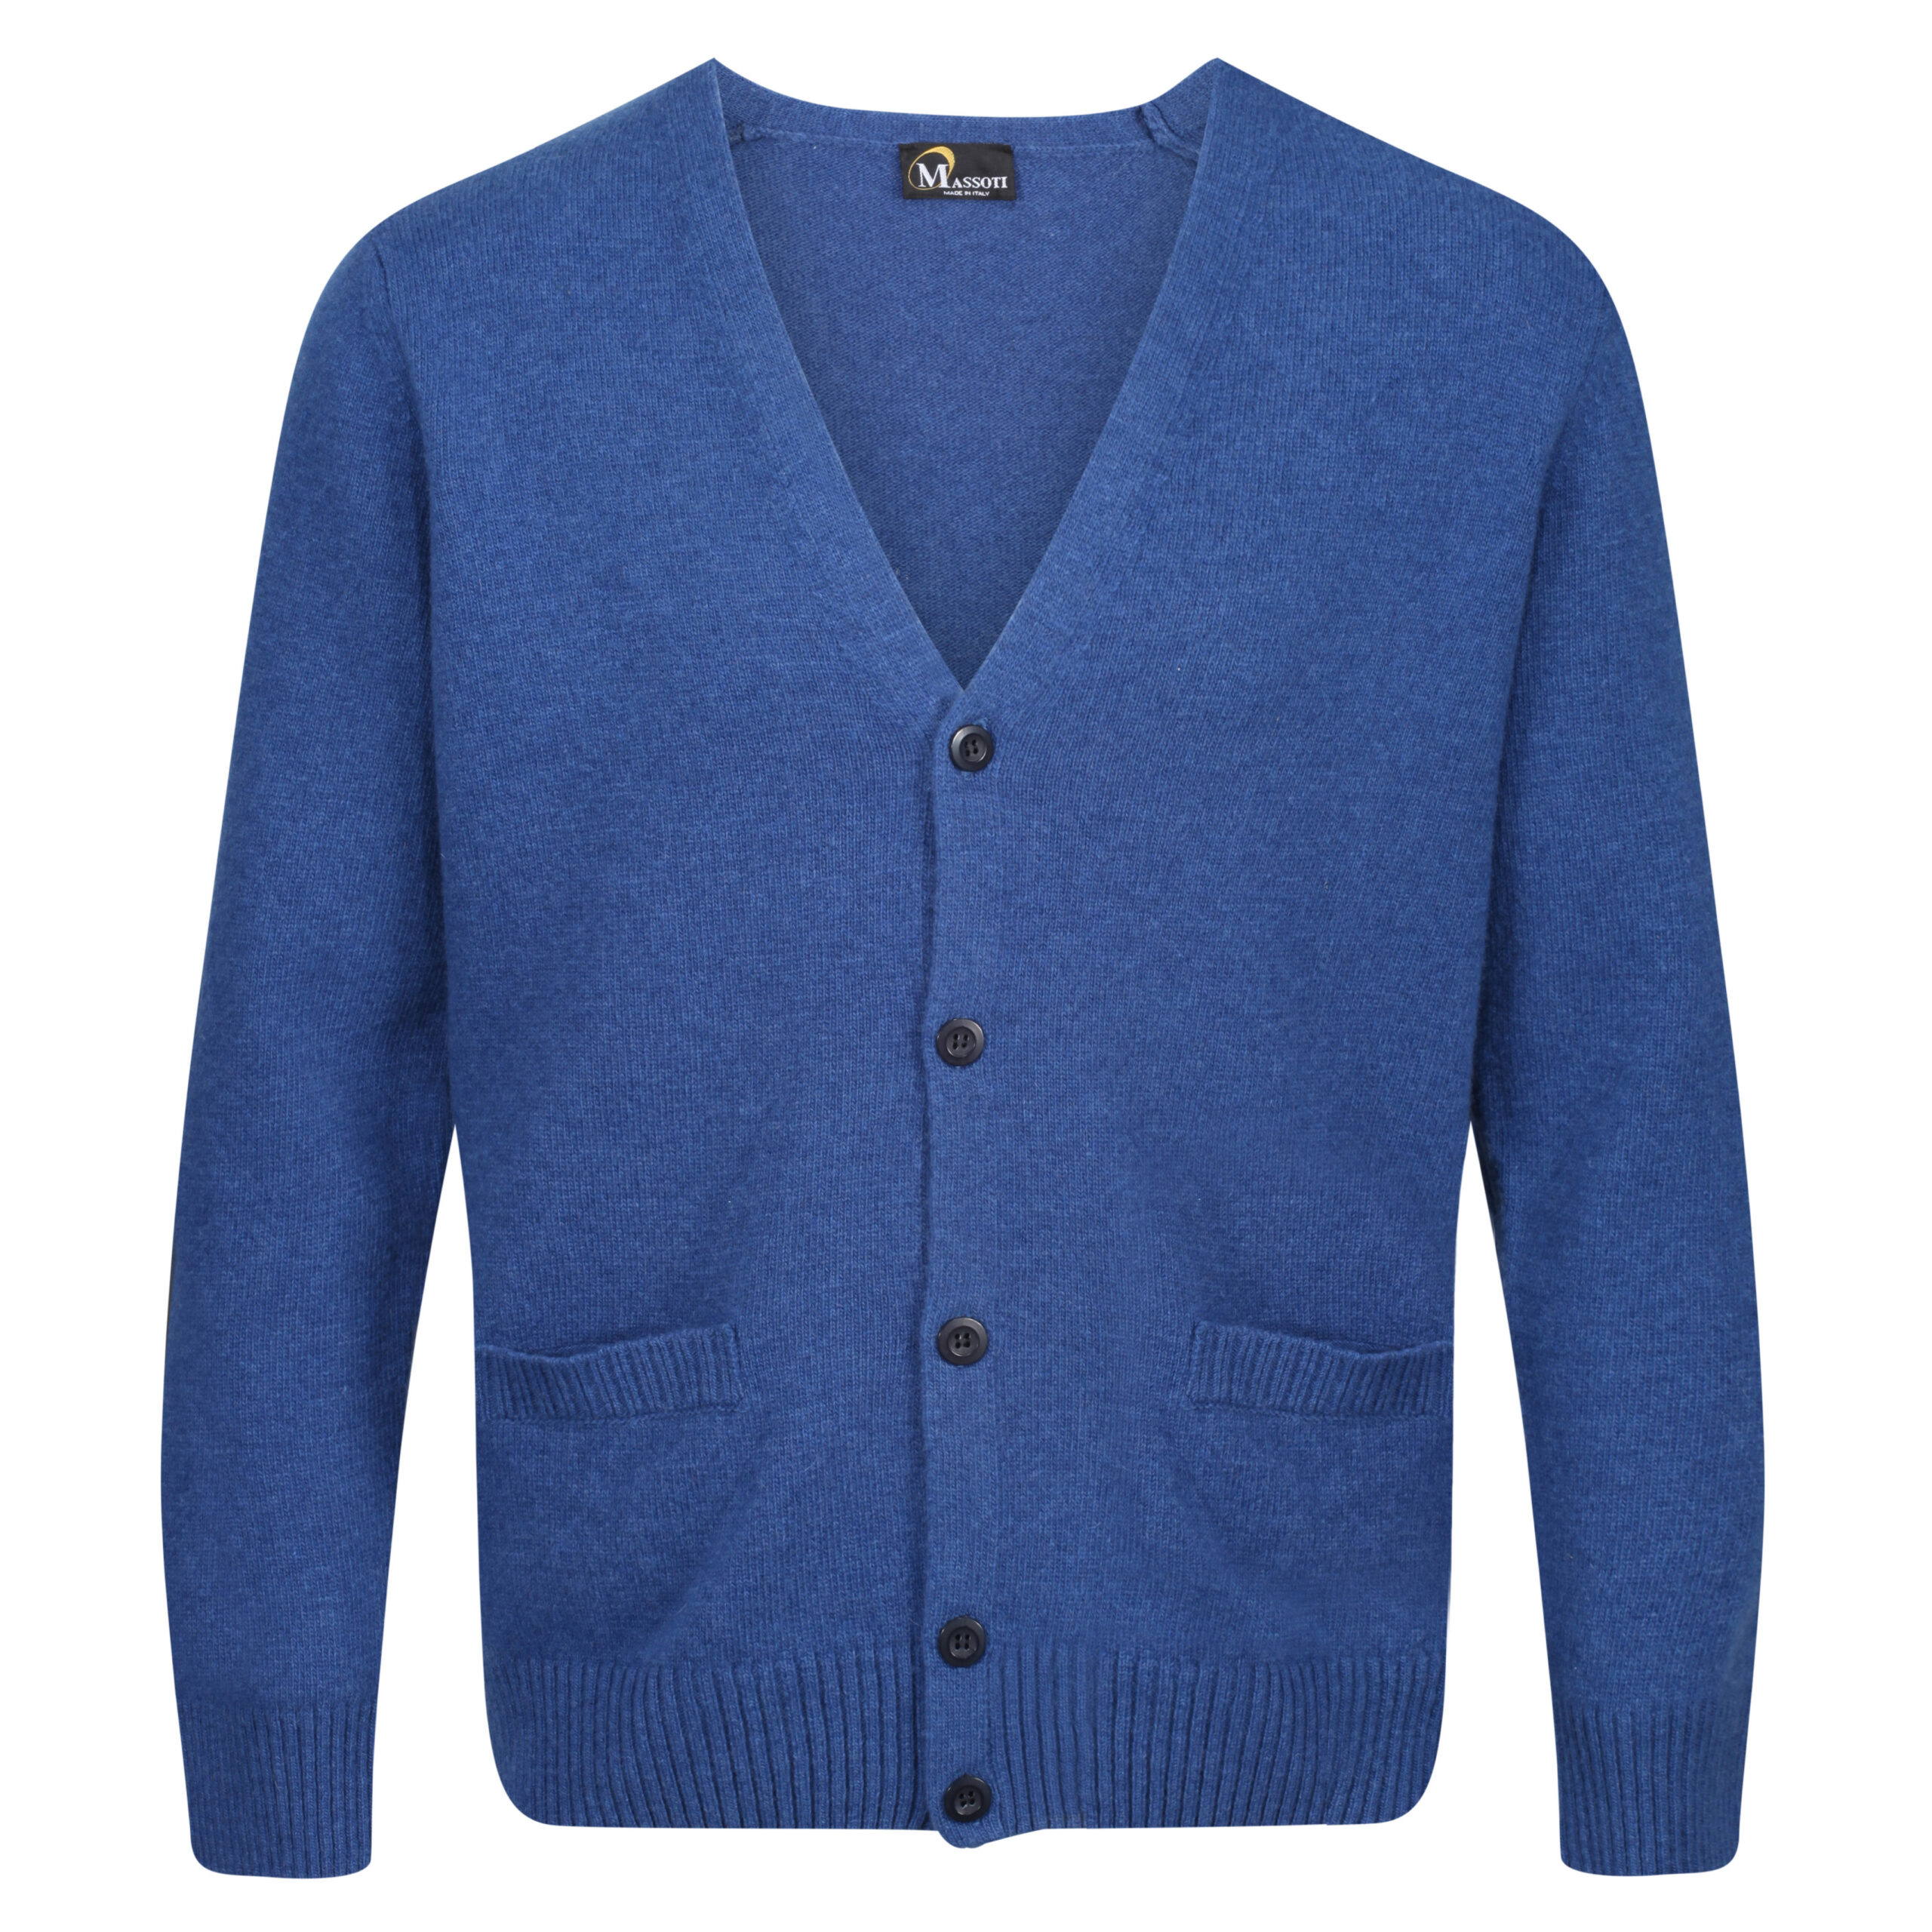 Classic cardigan • 100% lambswool (extra fine) - First For Men